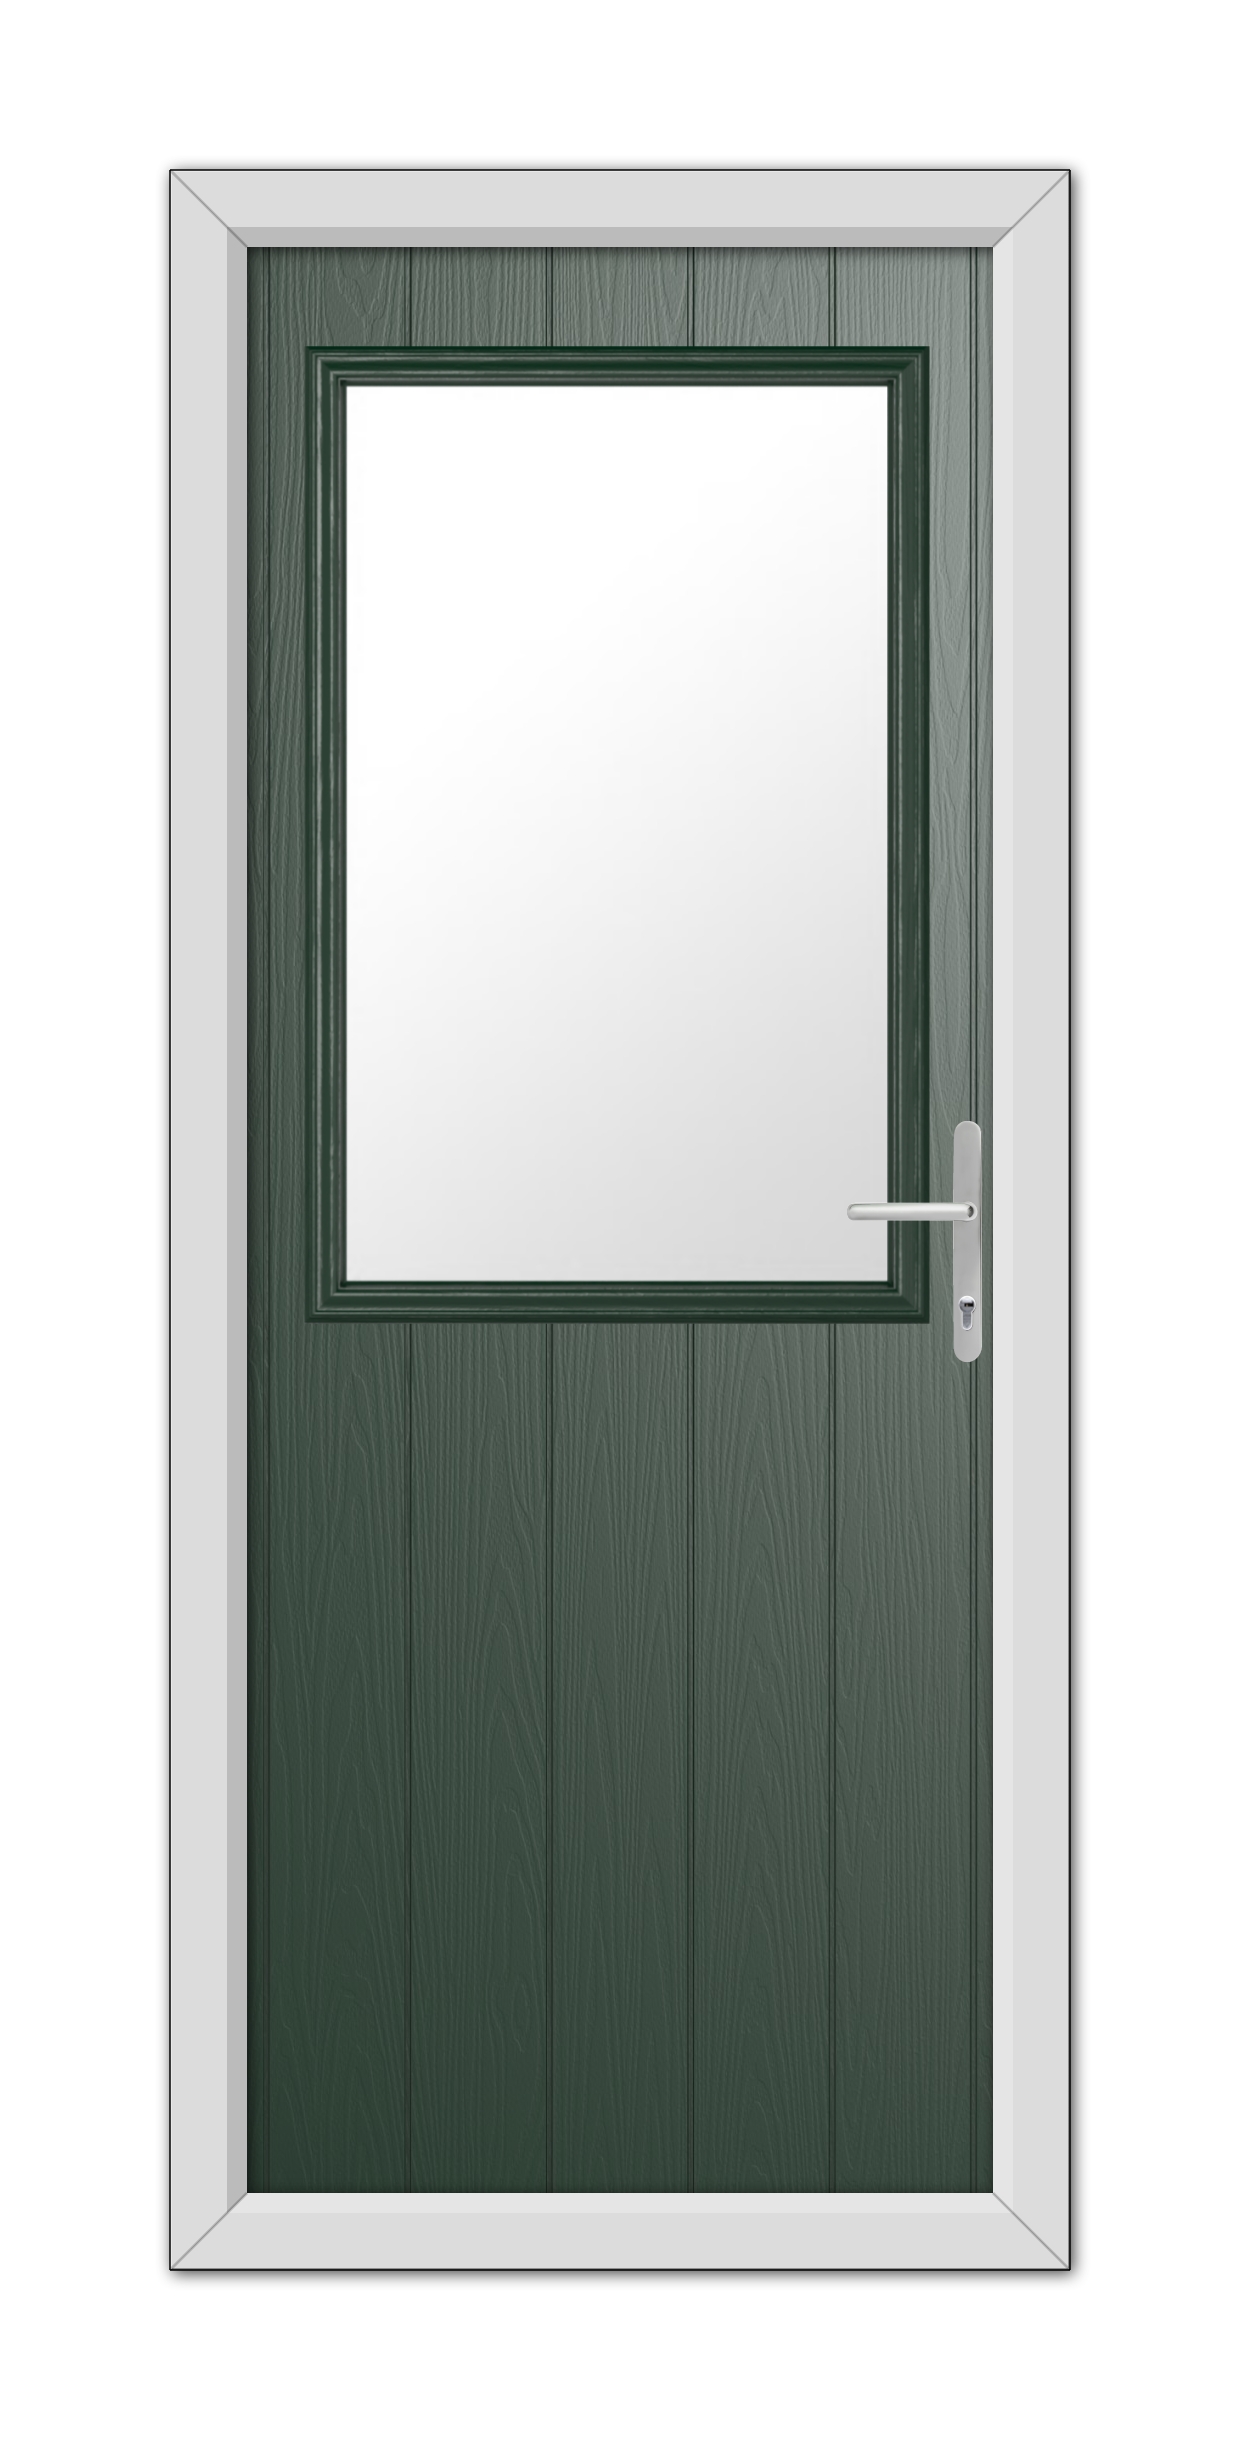 A closed modern Green Clifton Composite Door 48mm Timber Core with a dark green wood texture, featuring a large centered window and a white handle on the right.